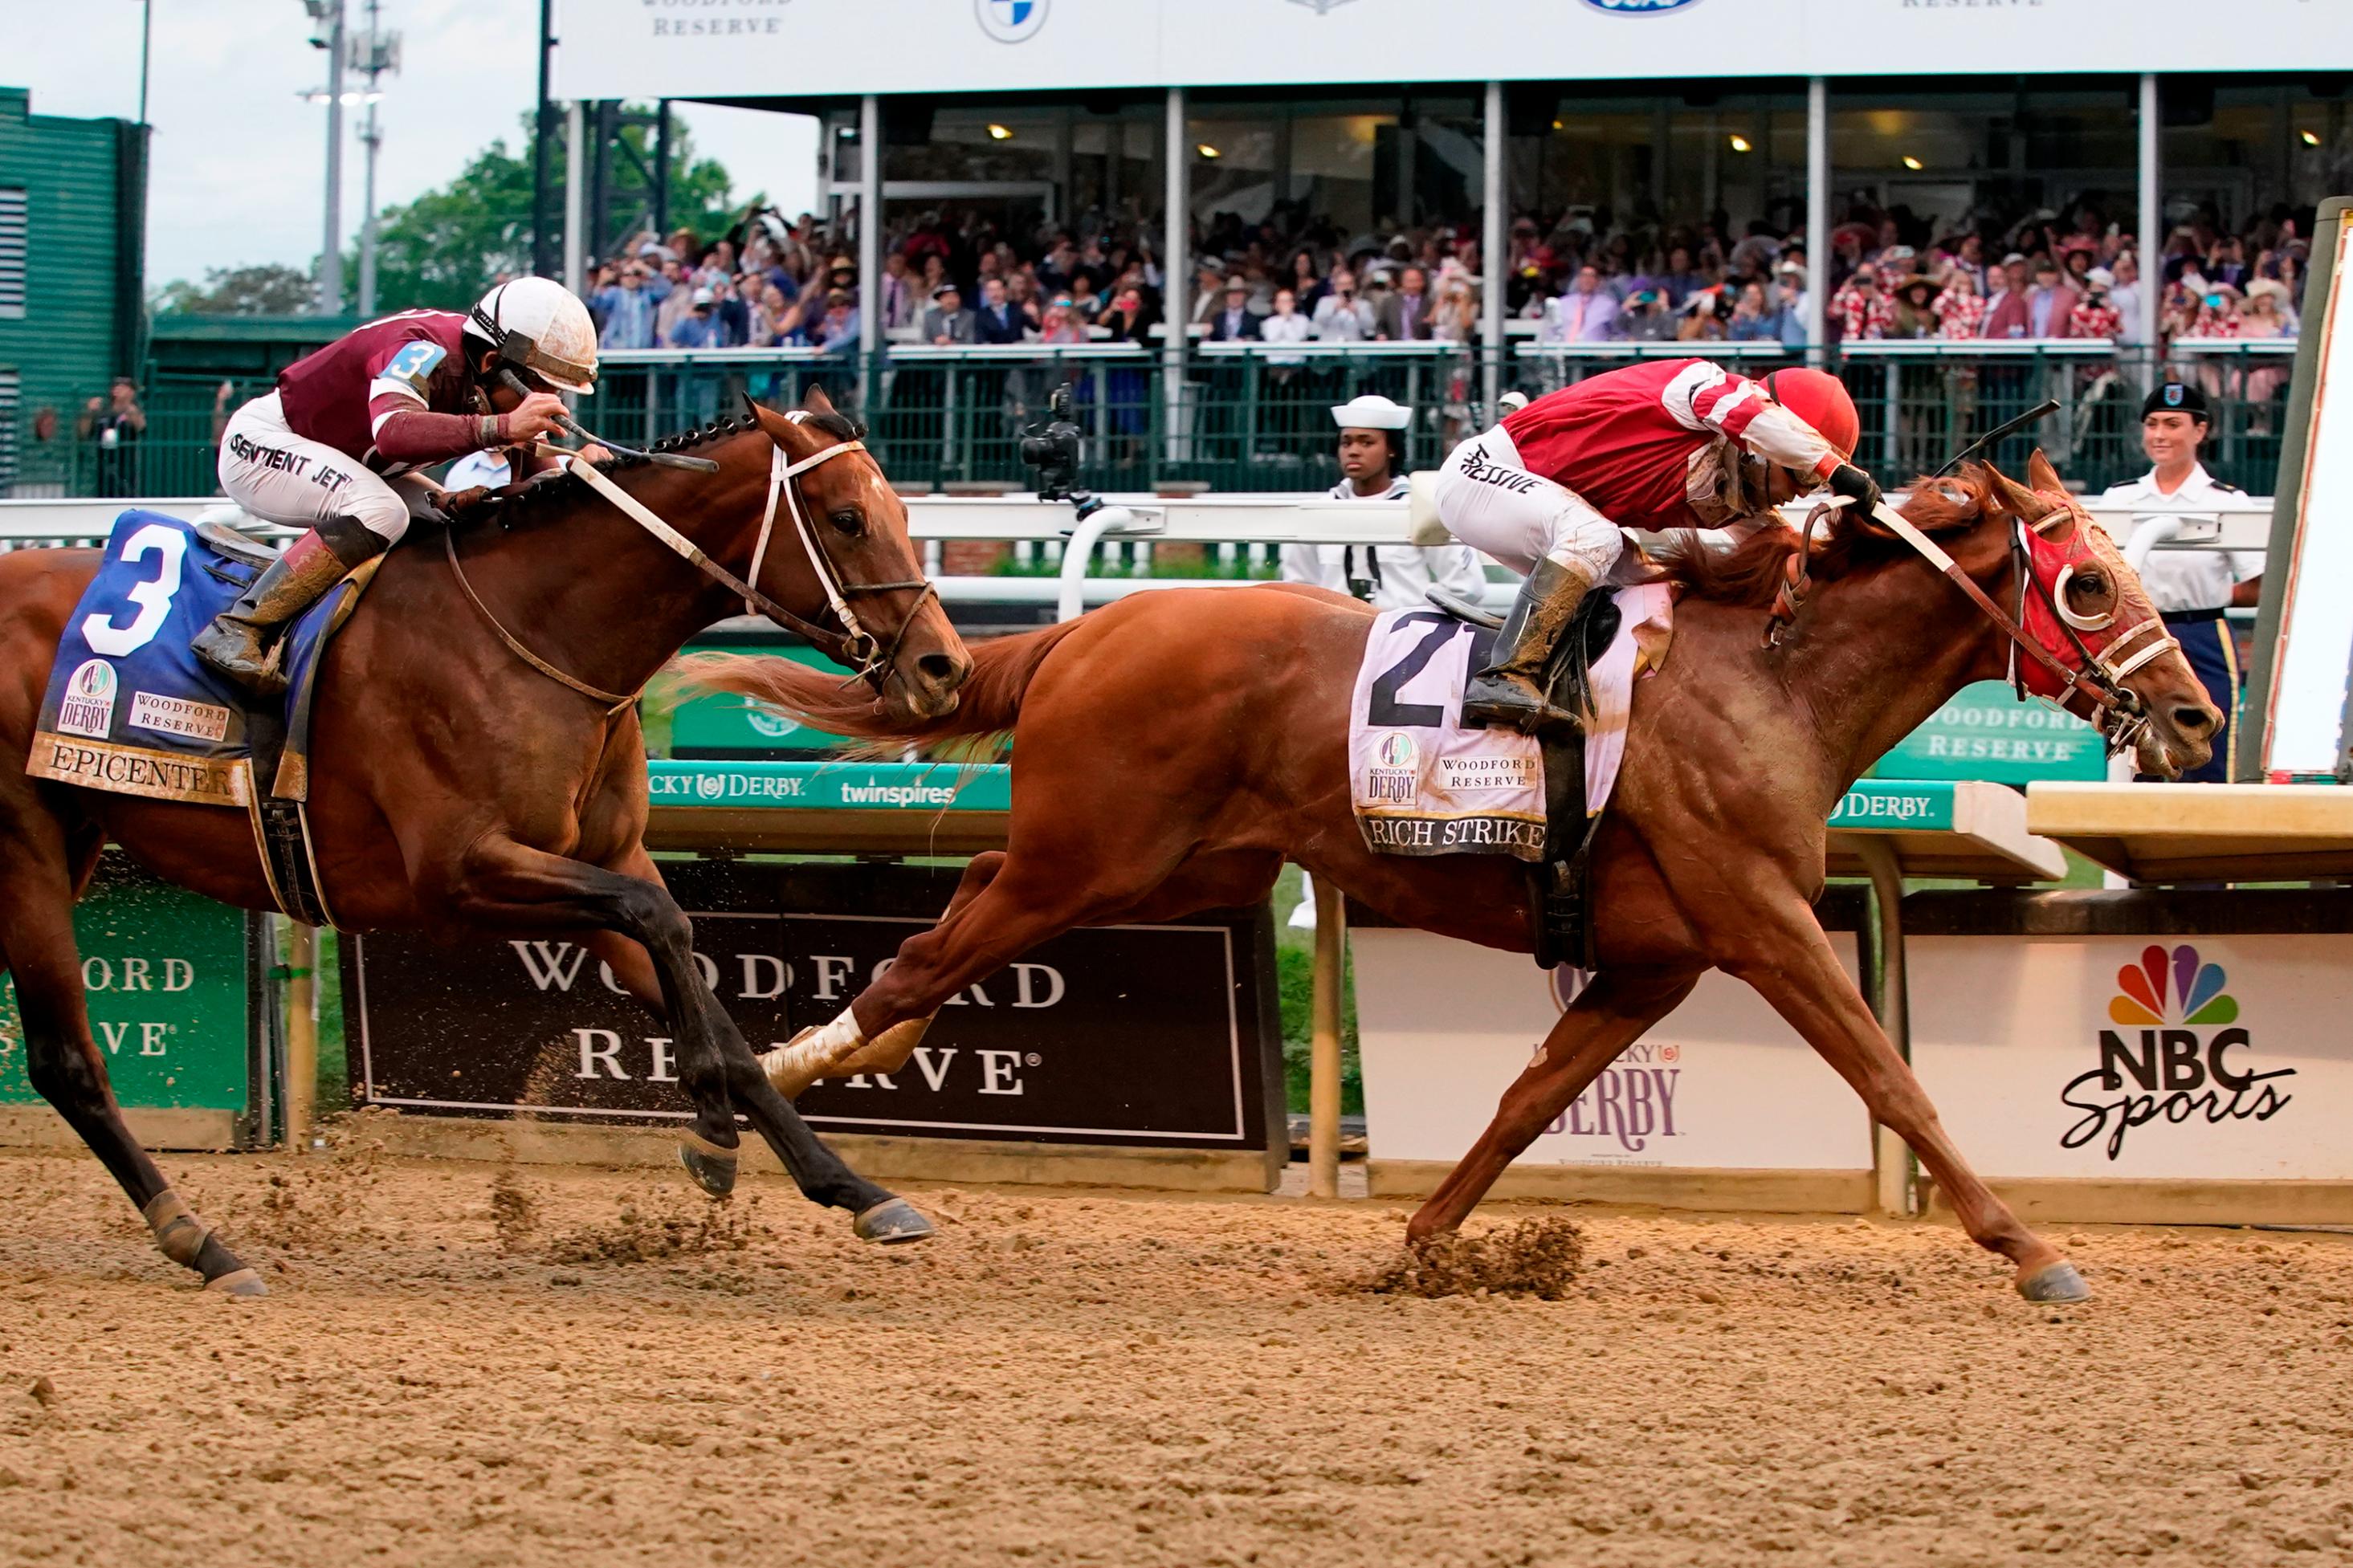 2022 Preakness Stakes: Everything you need to know about the middle jewel in the Triple Crown